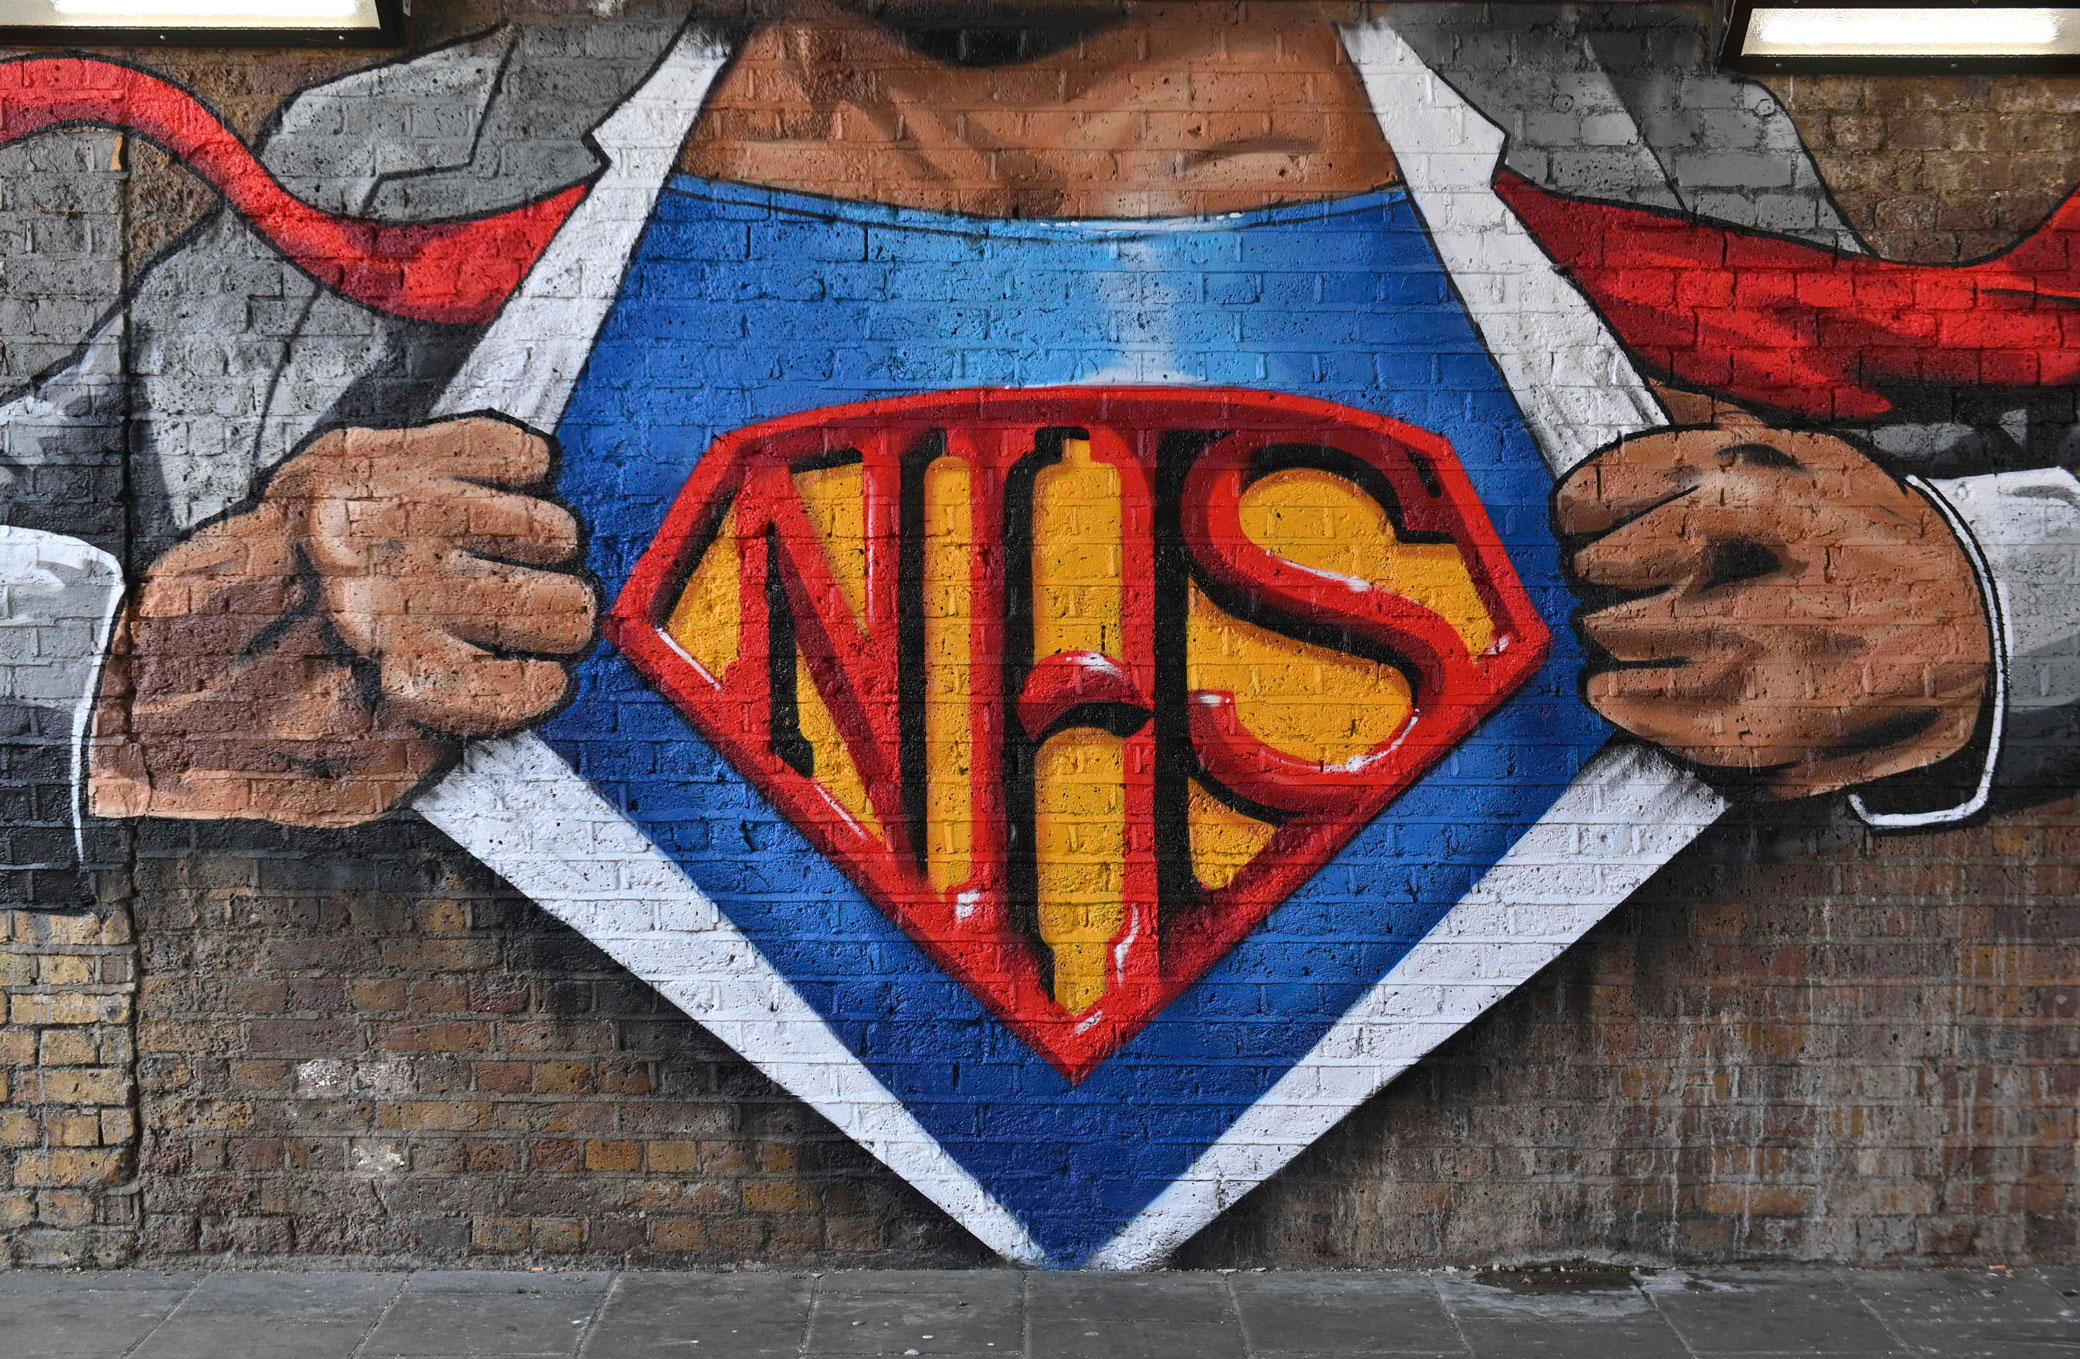 Work by a graffiti artist depicting the torso of a superman-style character pulling back his shirt to reveal a costume bearing the letters ‘NHS’.